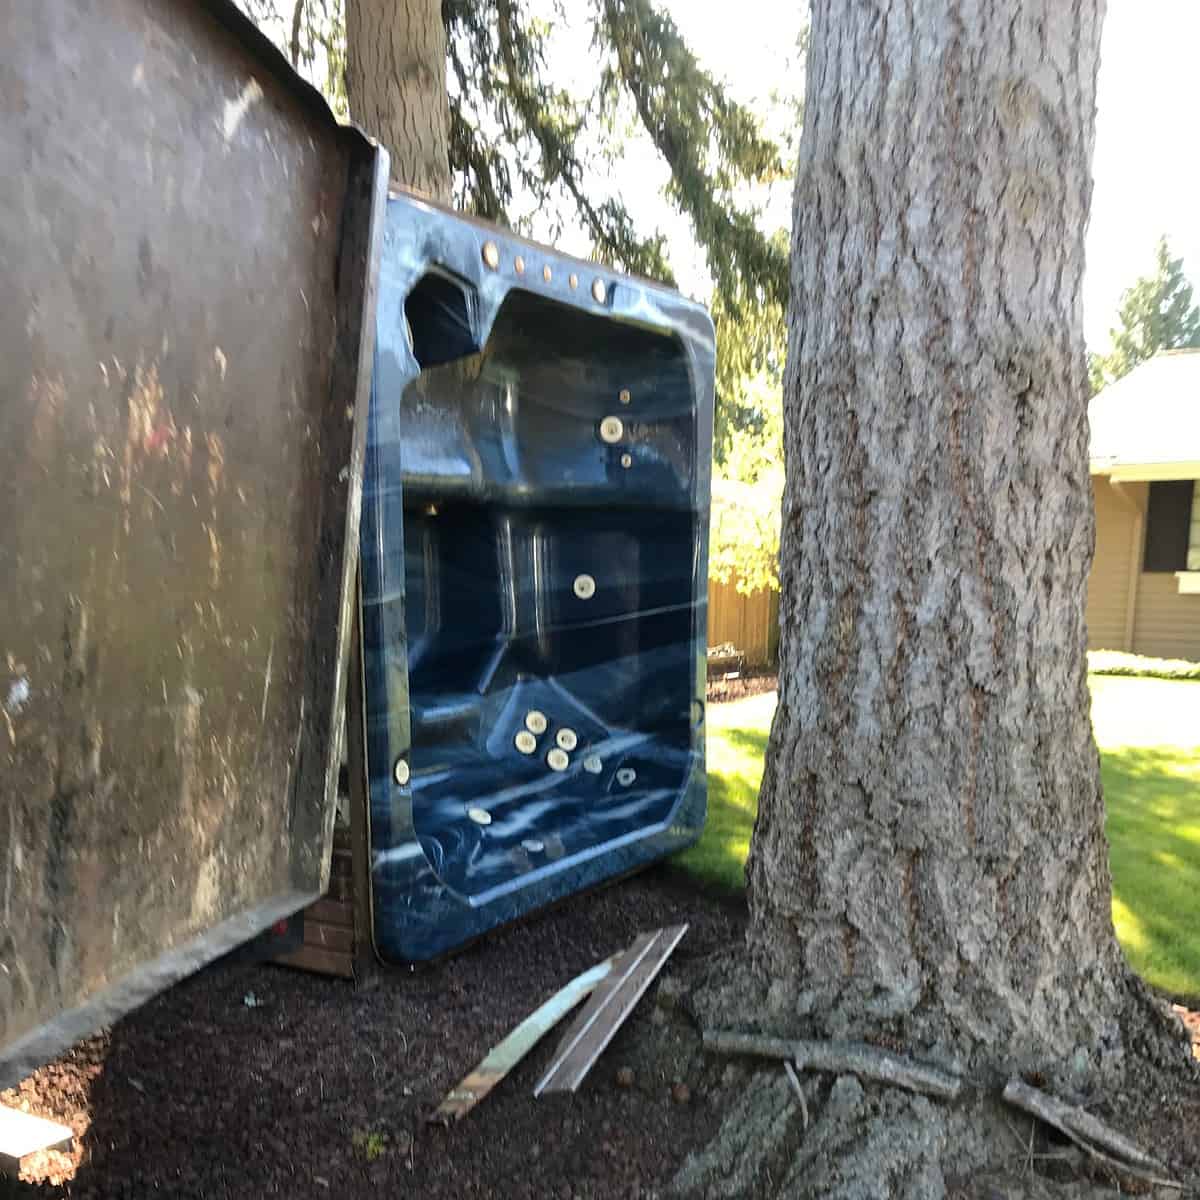 junk b gone hot tub removal seattle